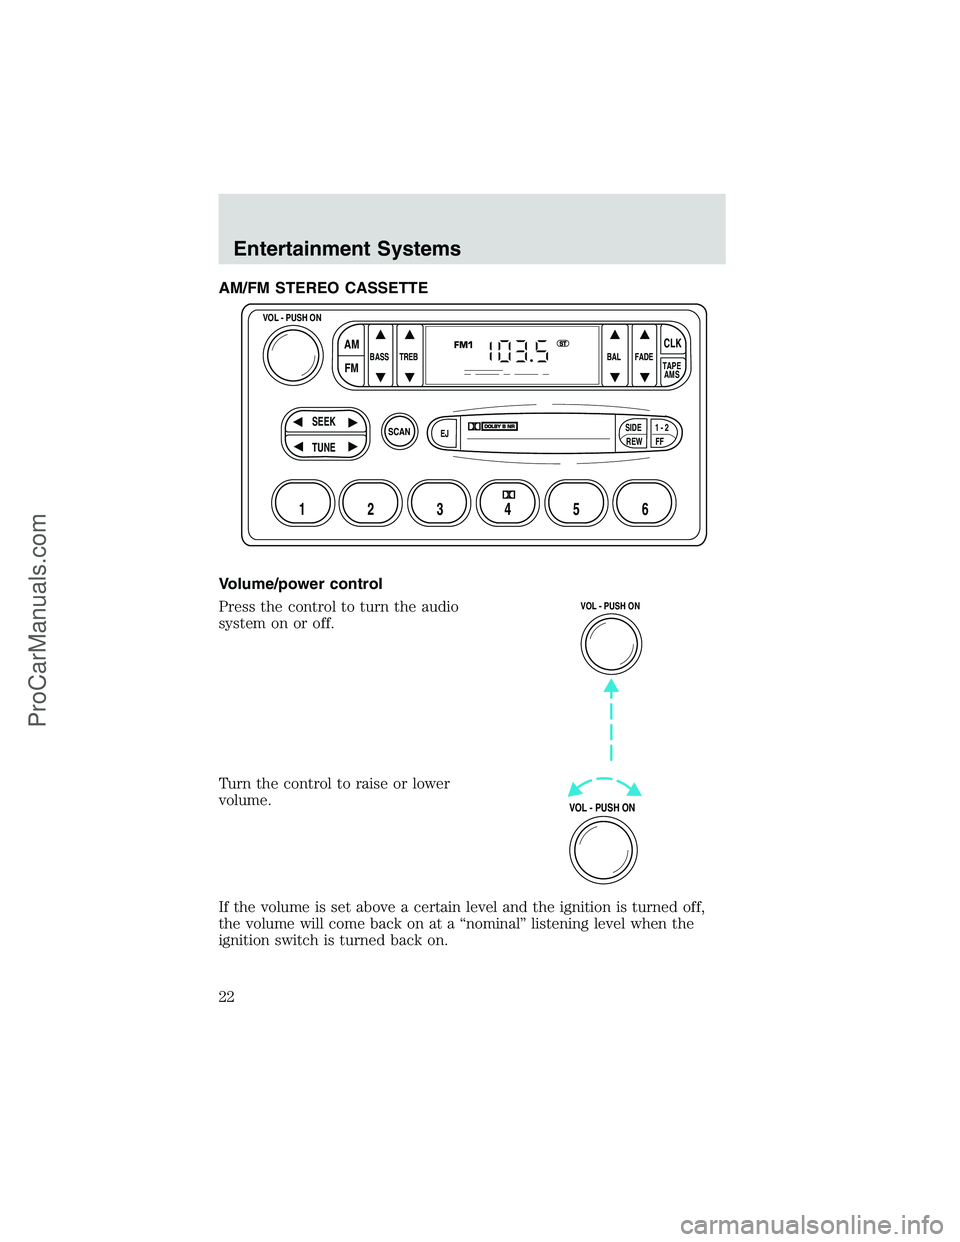 FORD E-250 2002  Owners Manual AM/FM STEREO CASSETTE
Volume/power control
Press the control to turn the audio
system on or off.
Turn the control to raise or lower
volume.
If the volume is set above a certain level and the ignition 